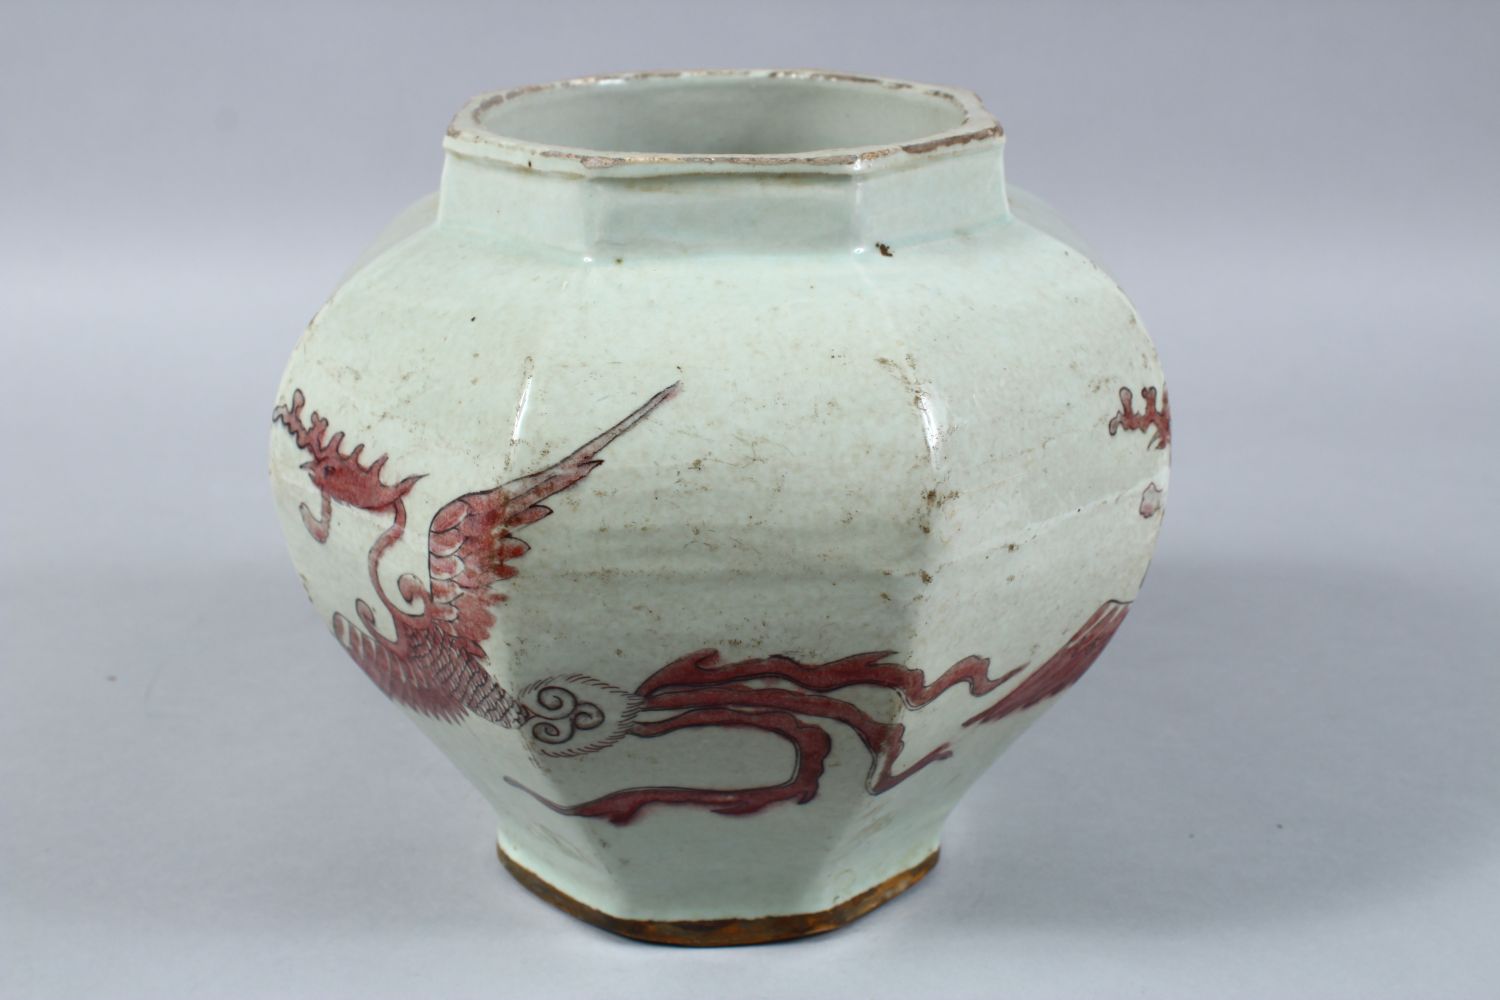 A CHINESE IRON RED DECORATED OCTAGONAL PORCELAIN JAR, the body of the jar decorated in iron red to - Image 4 of 8